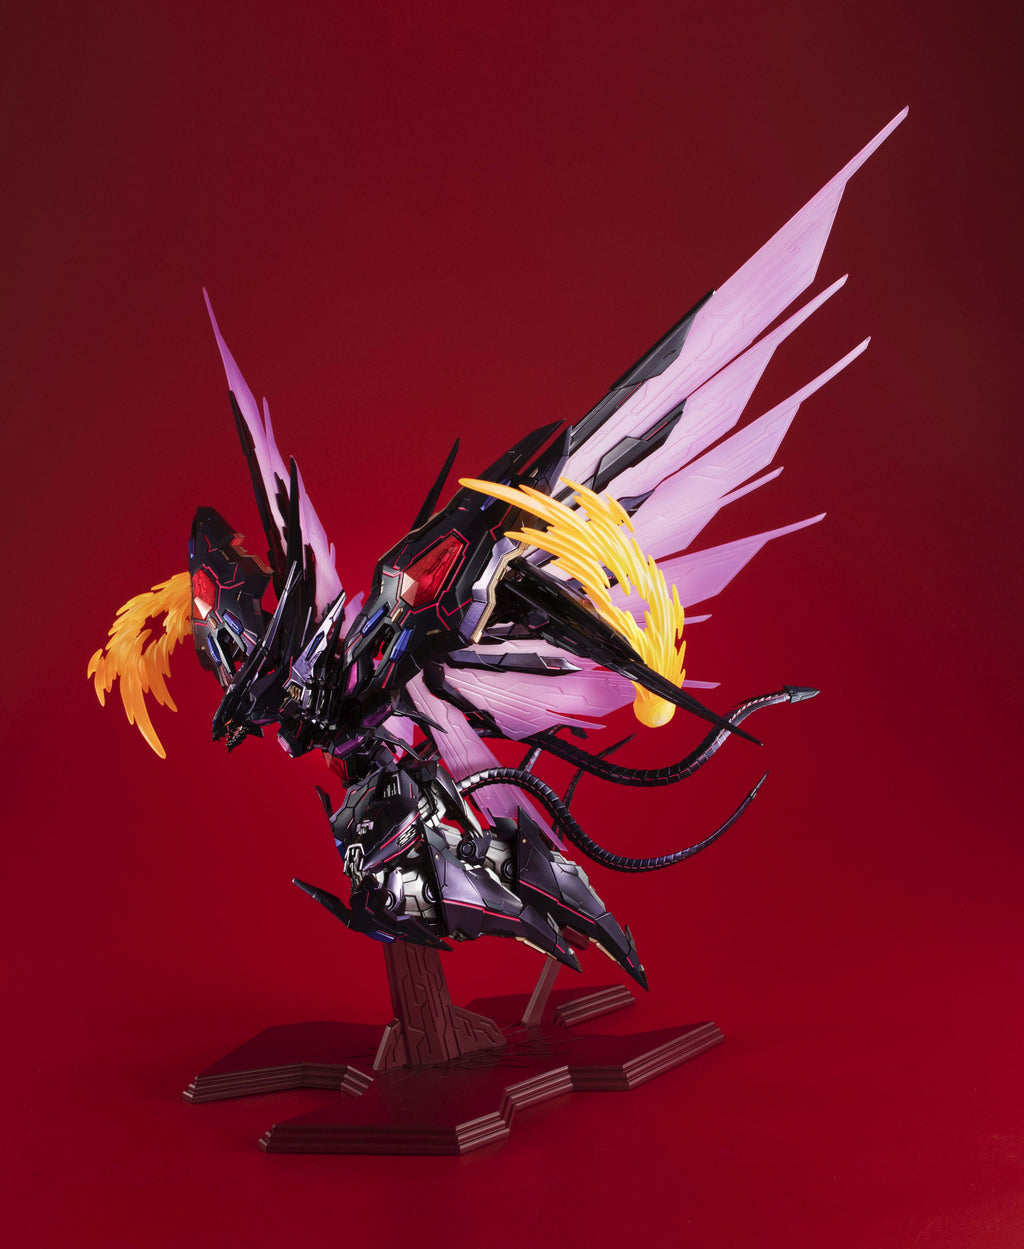 Match-Planet 火柴星人| MegaHouse ART WORKS MONSTERS 遊戲王ZEXAL No 